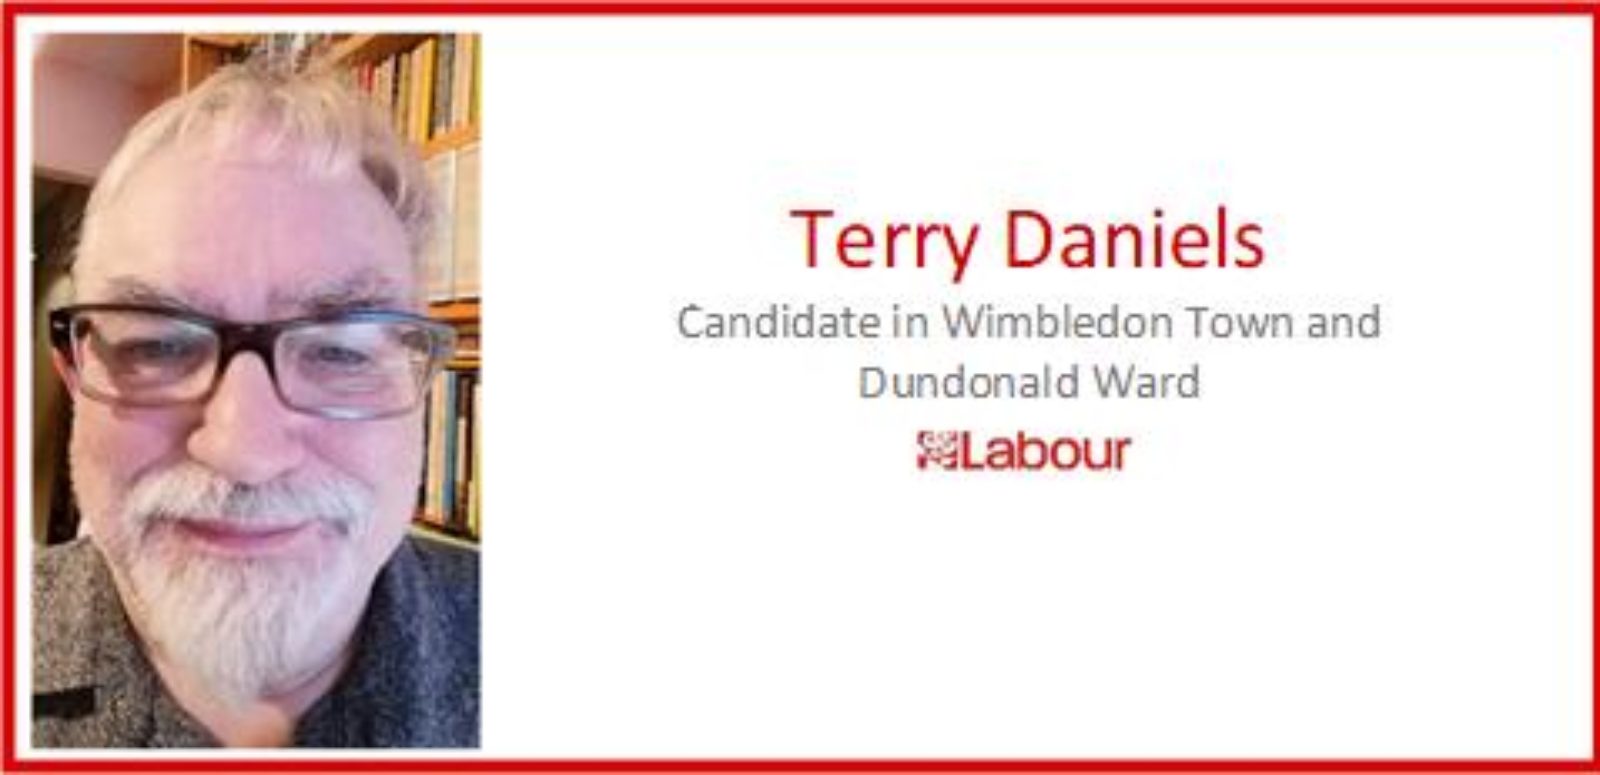 Terry, candidate in Wimbledon Town